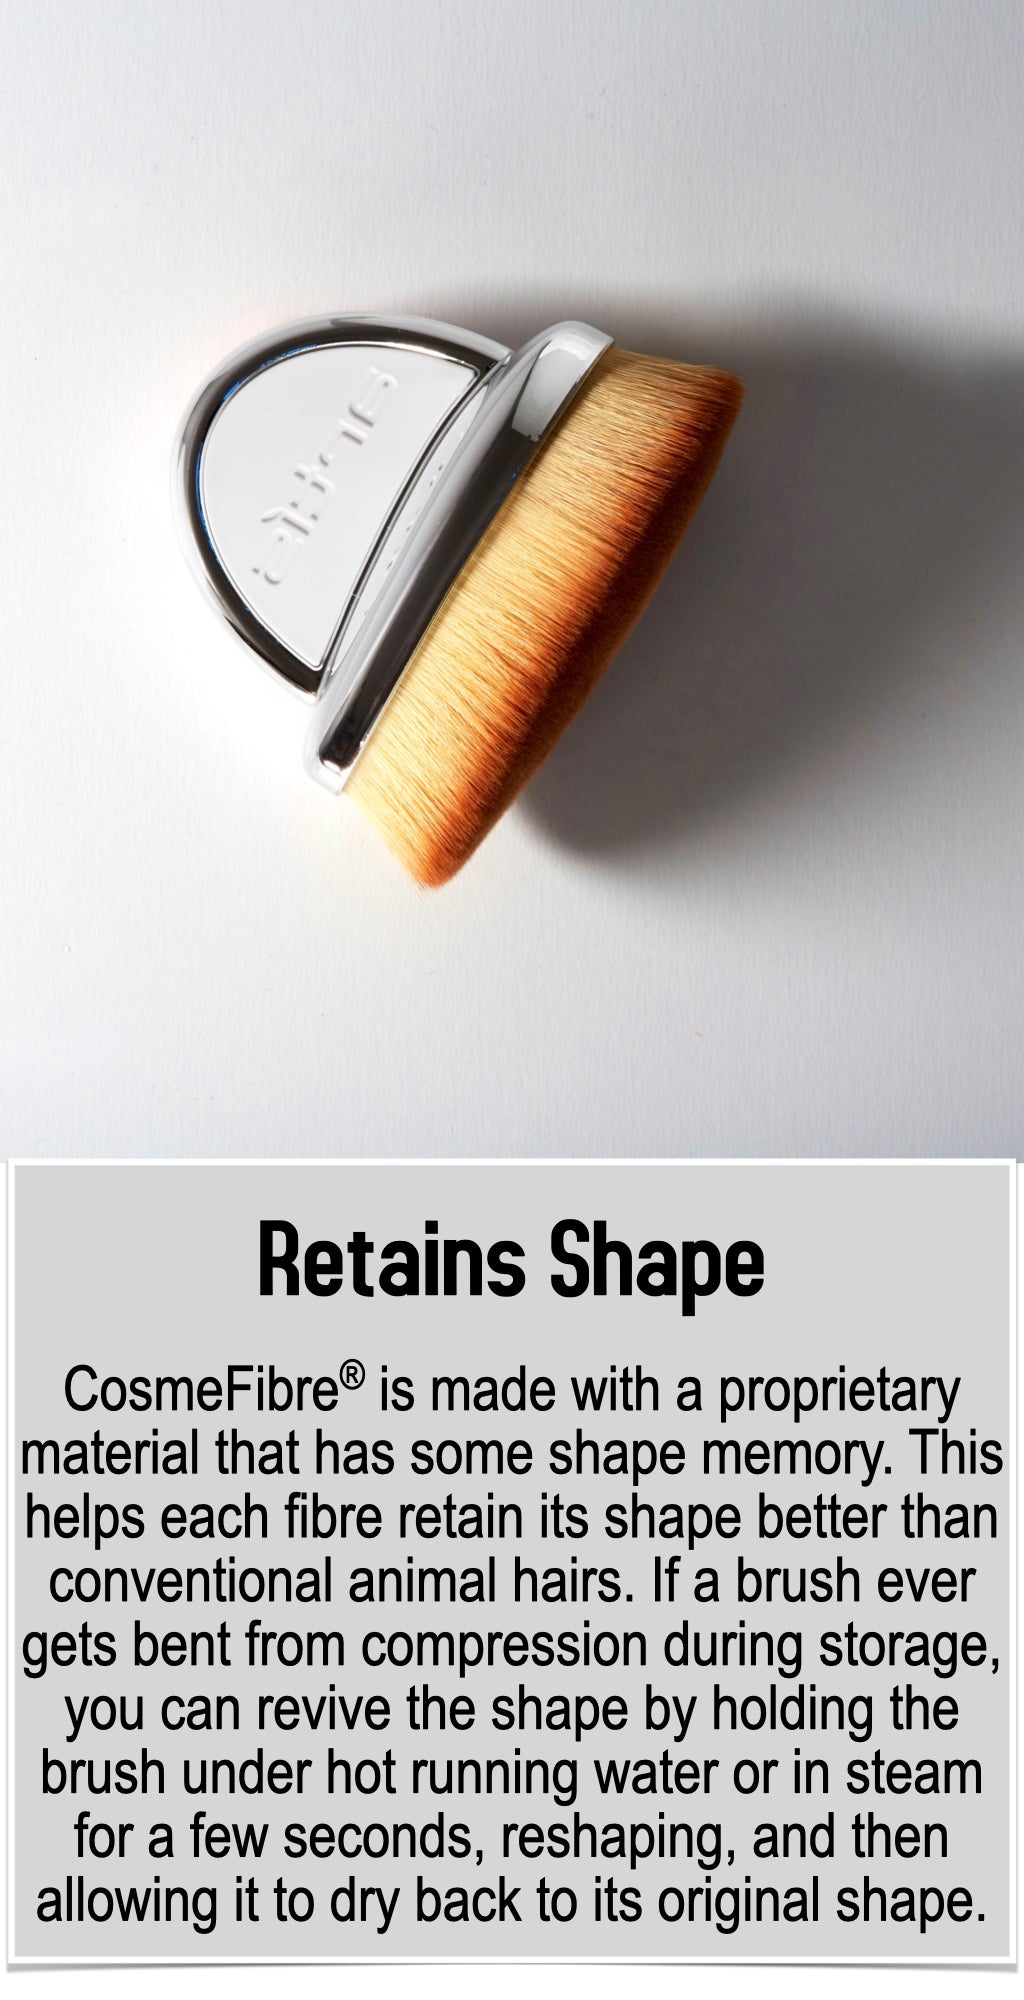 CosmeFibre® is made with a proprietary material that has some shape memory. This helps each fibre retain its shape better than conventional animal hairs. If a brush ever gets bent from compression during storage, you can revive the shape by holding the brush under hot running water or in steam for a few seconds, reshaping, and then allowing it to dry back to its original shape.